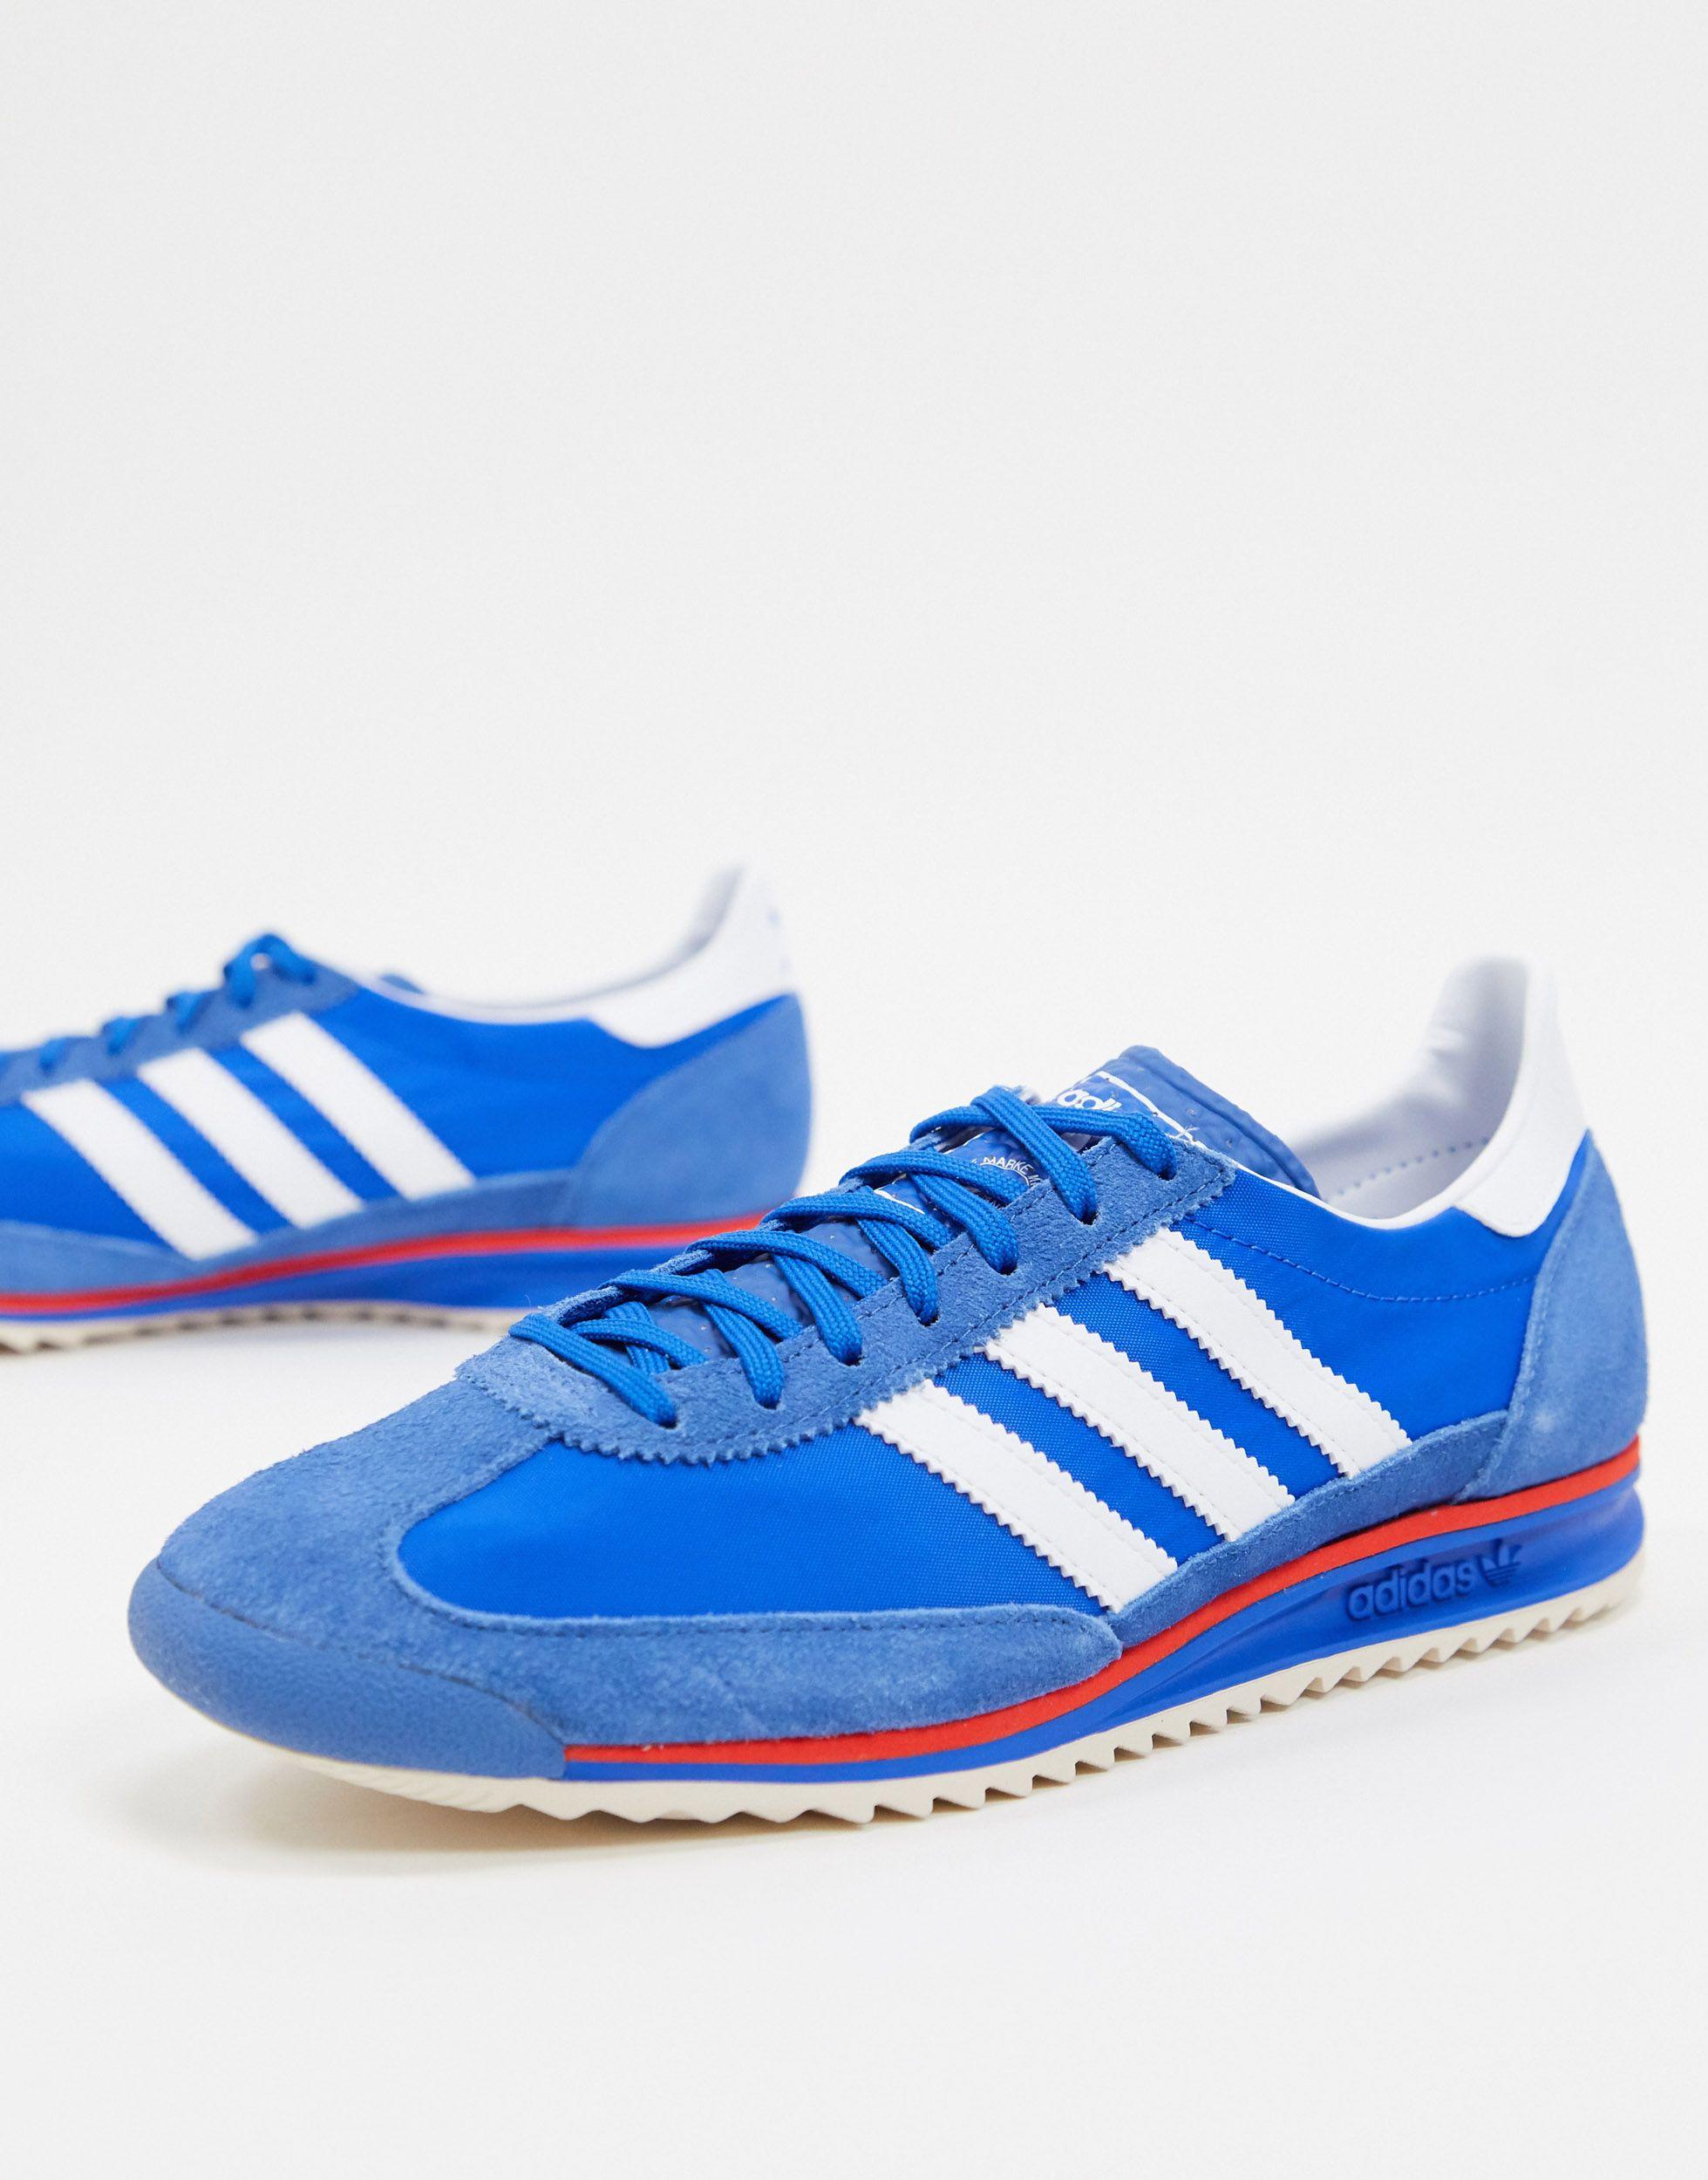 adidas Originals Synthetic Sl 72 in Blue for Men - Lyst